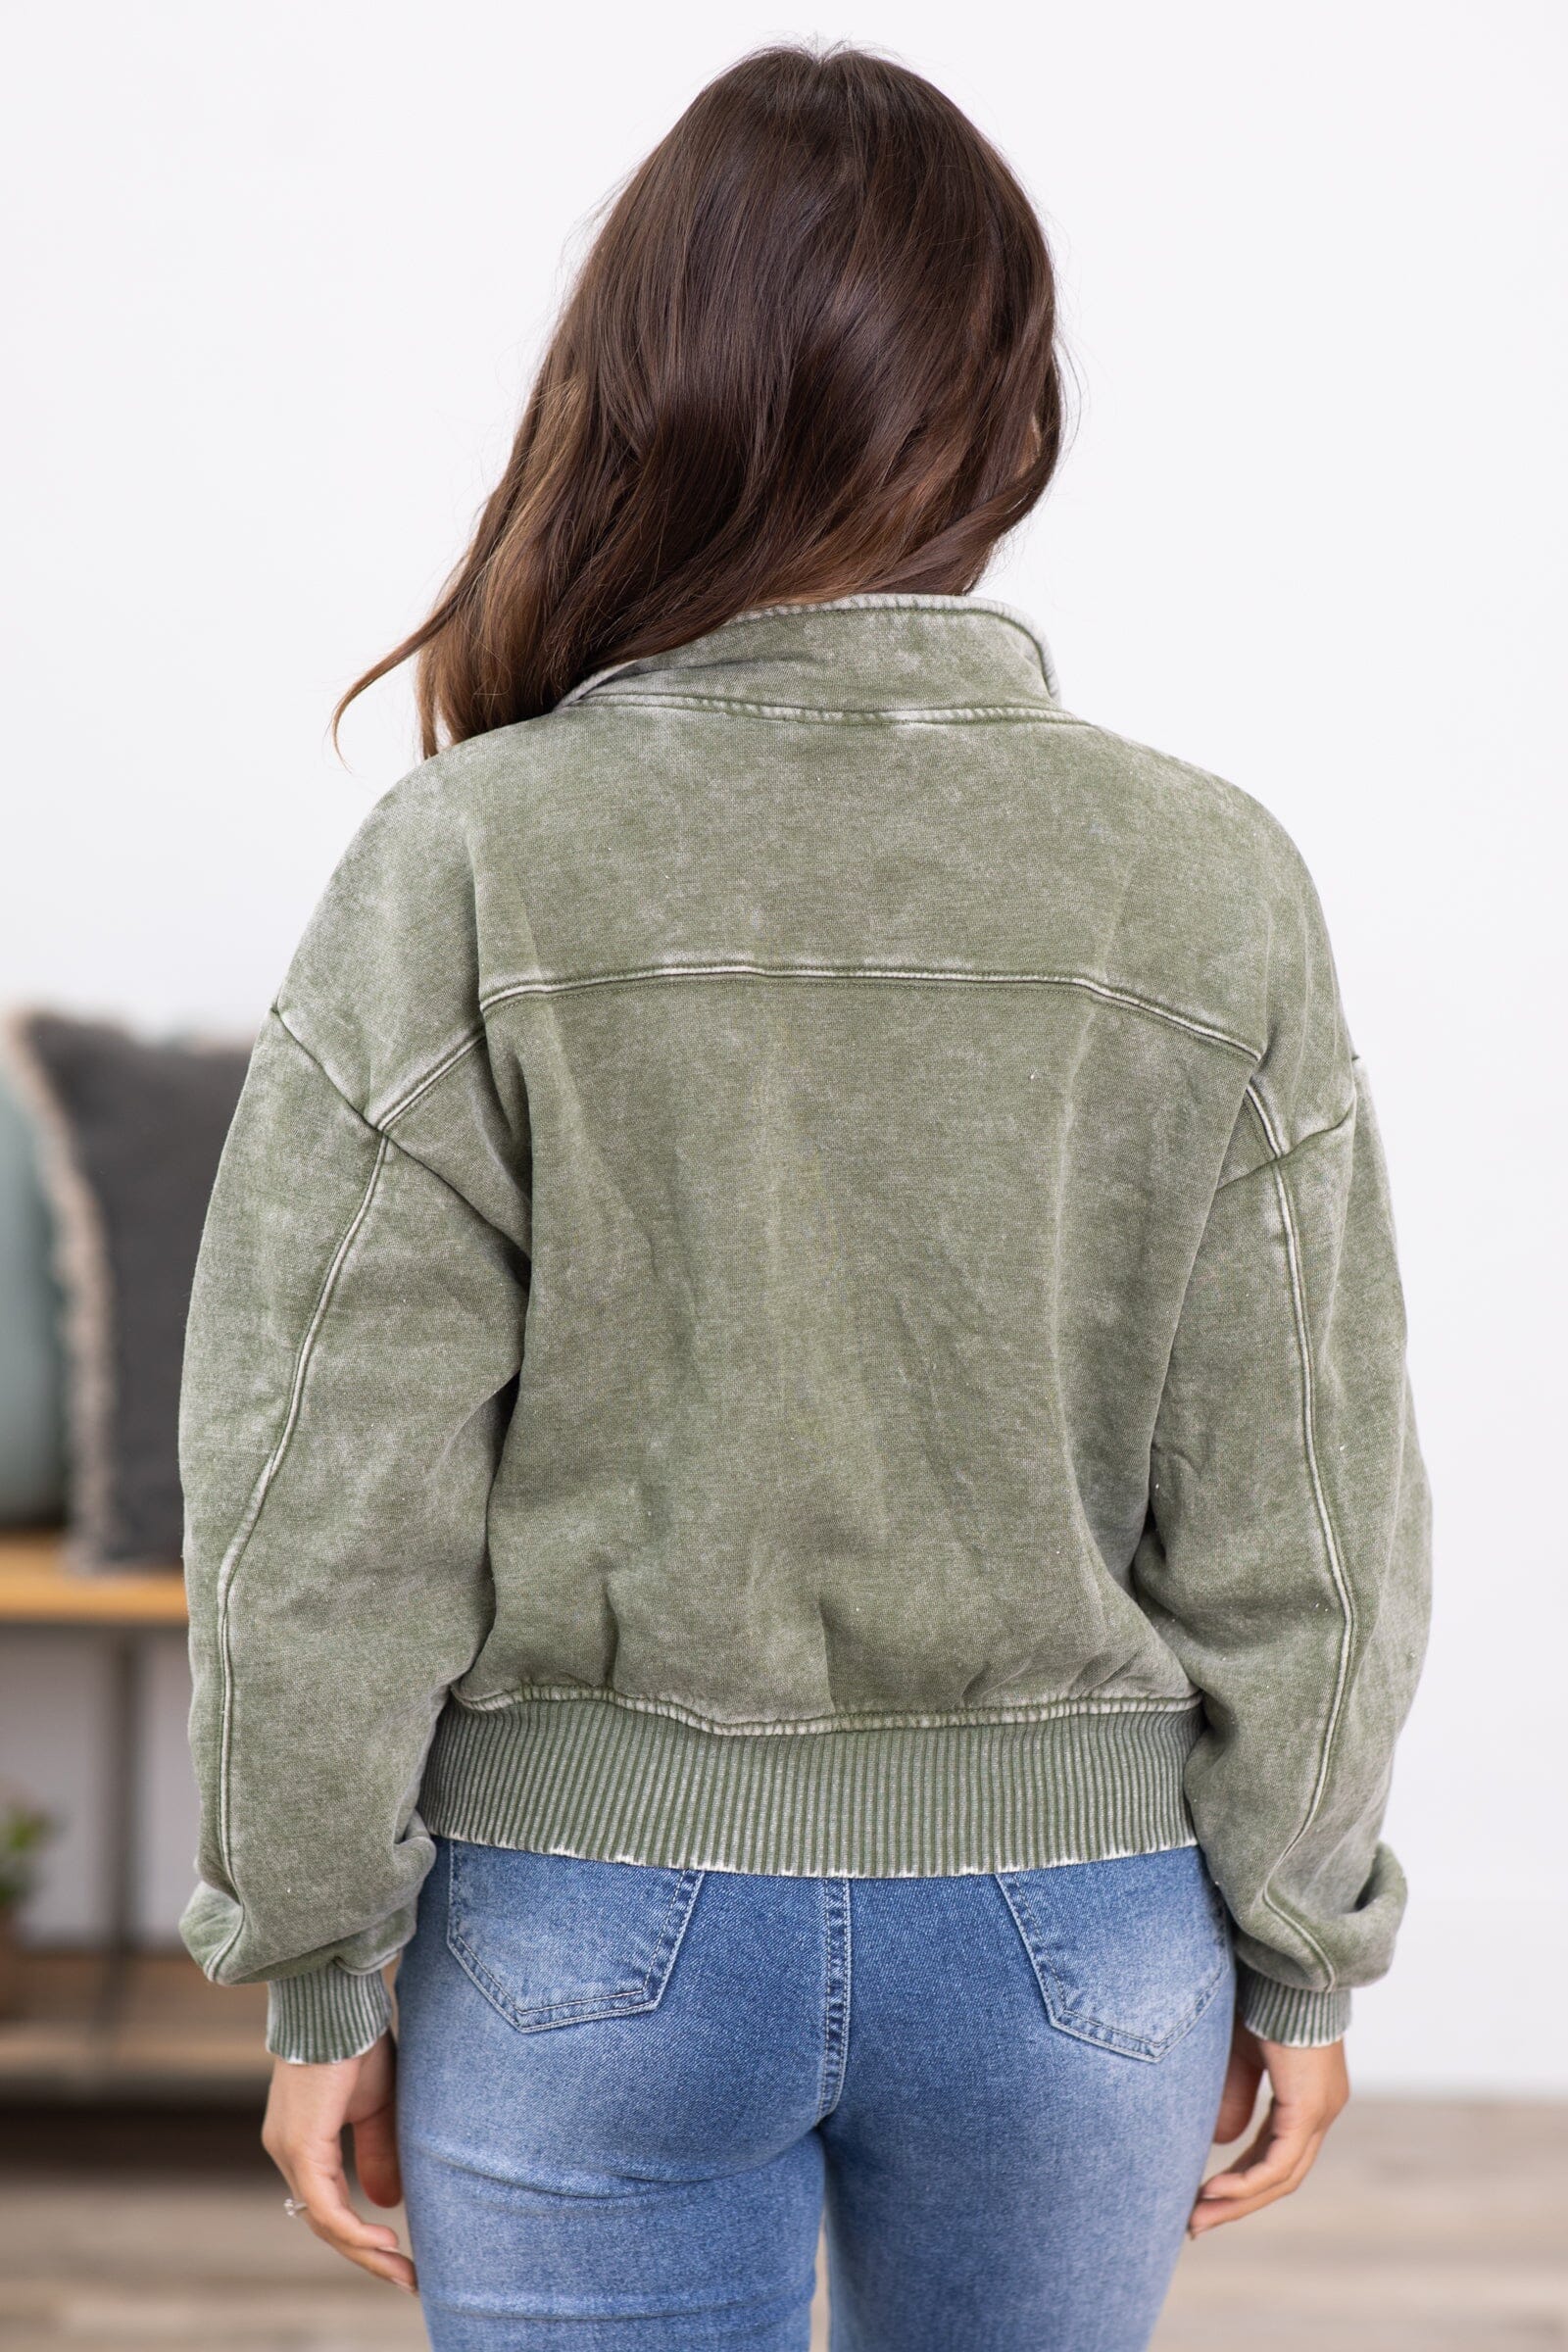 Olive Acid Wash Fleece 1/4 Zip Pullover - Filly Flair